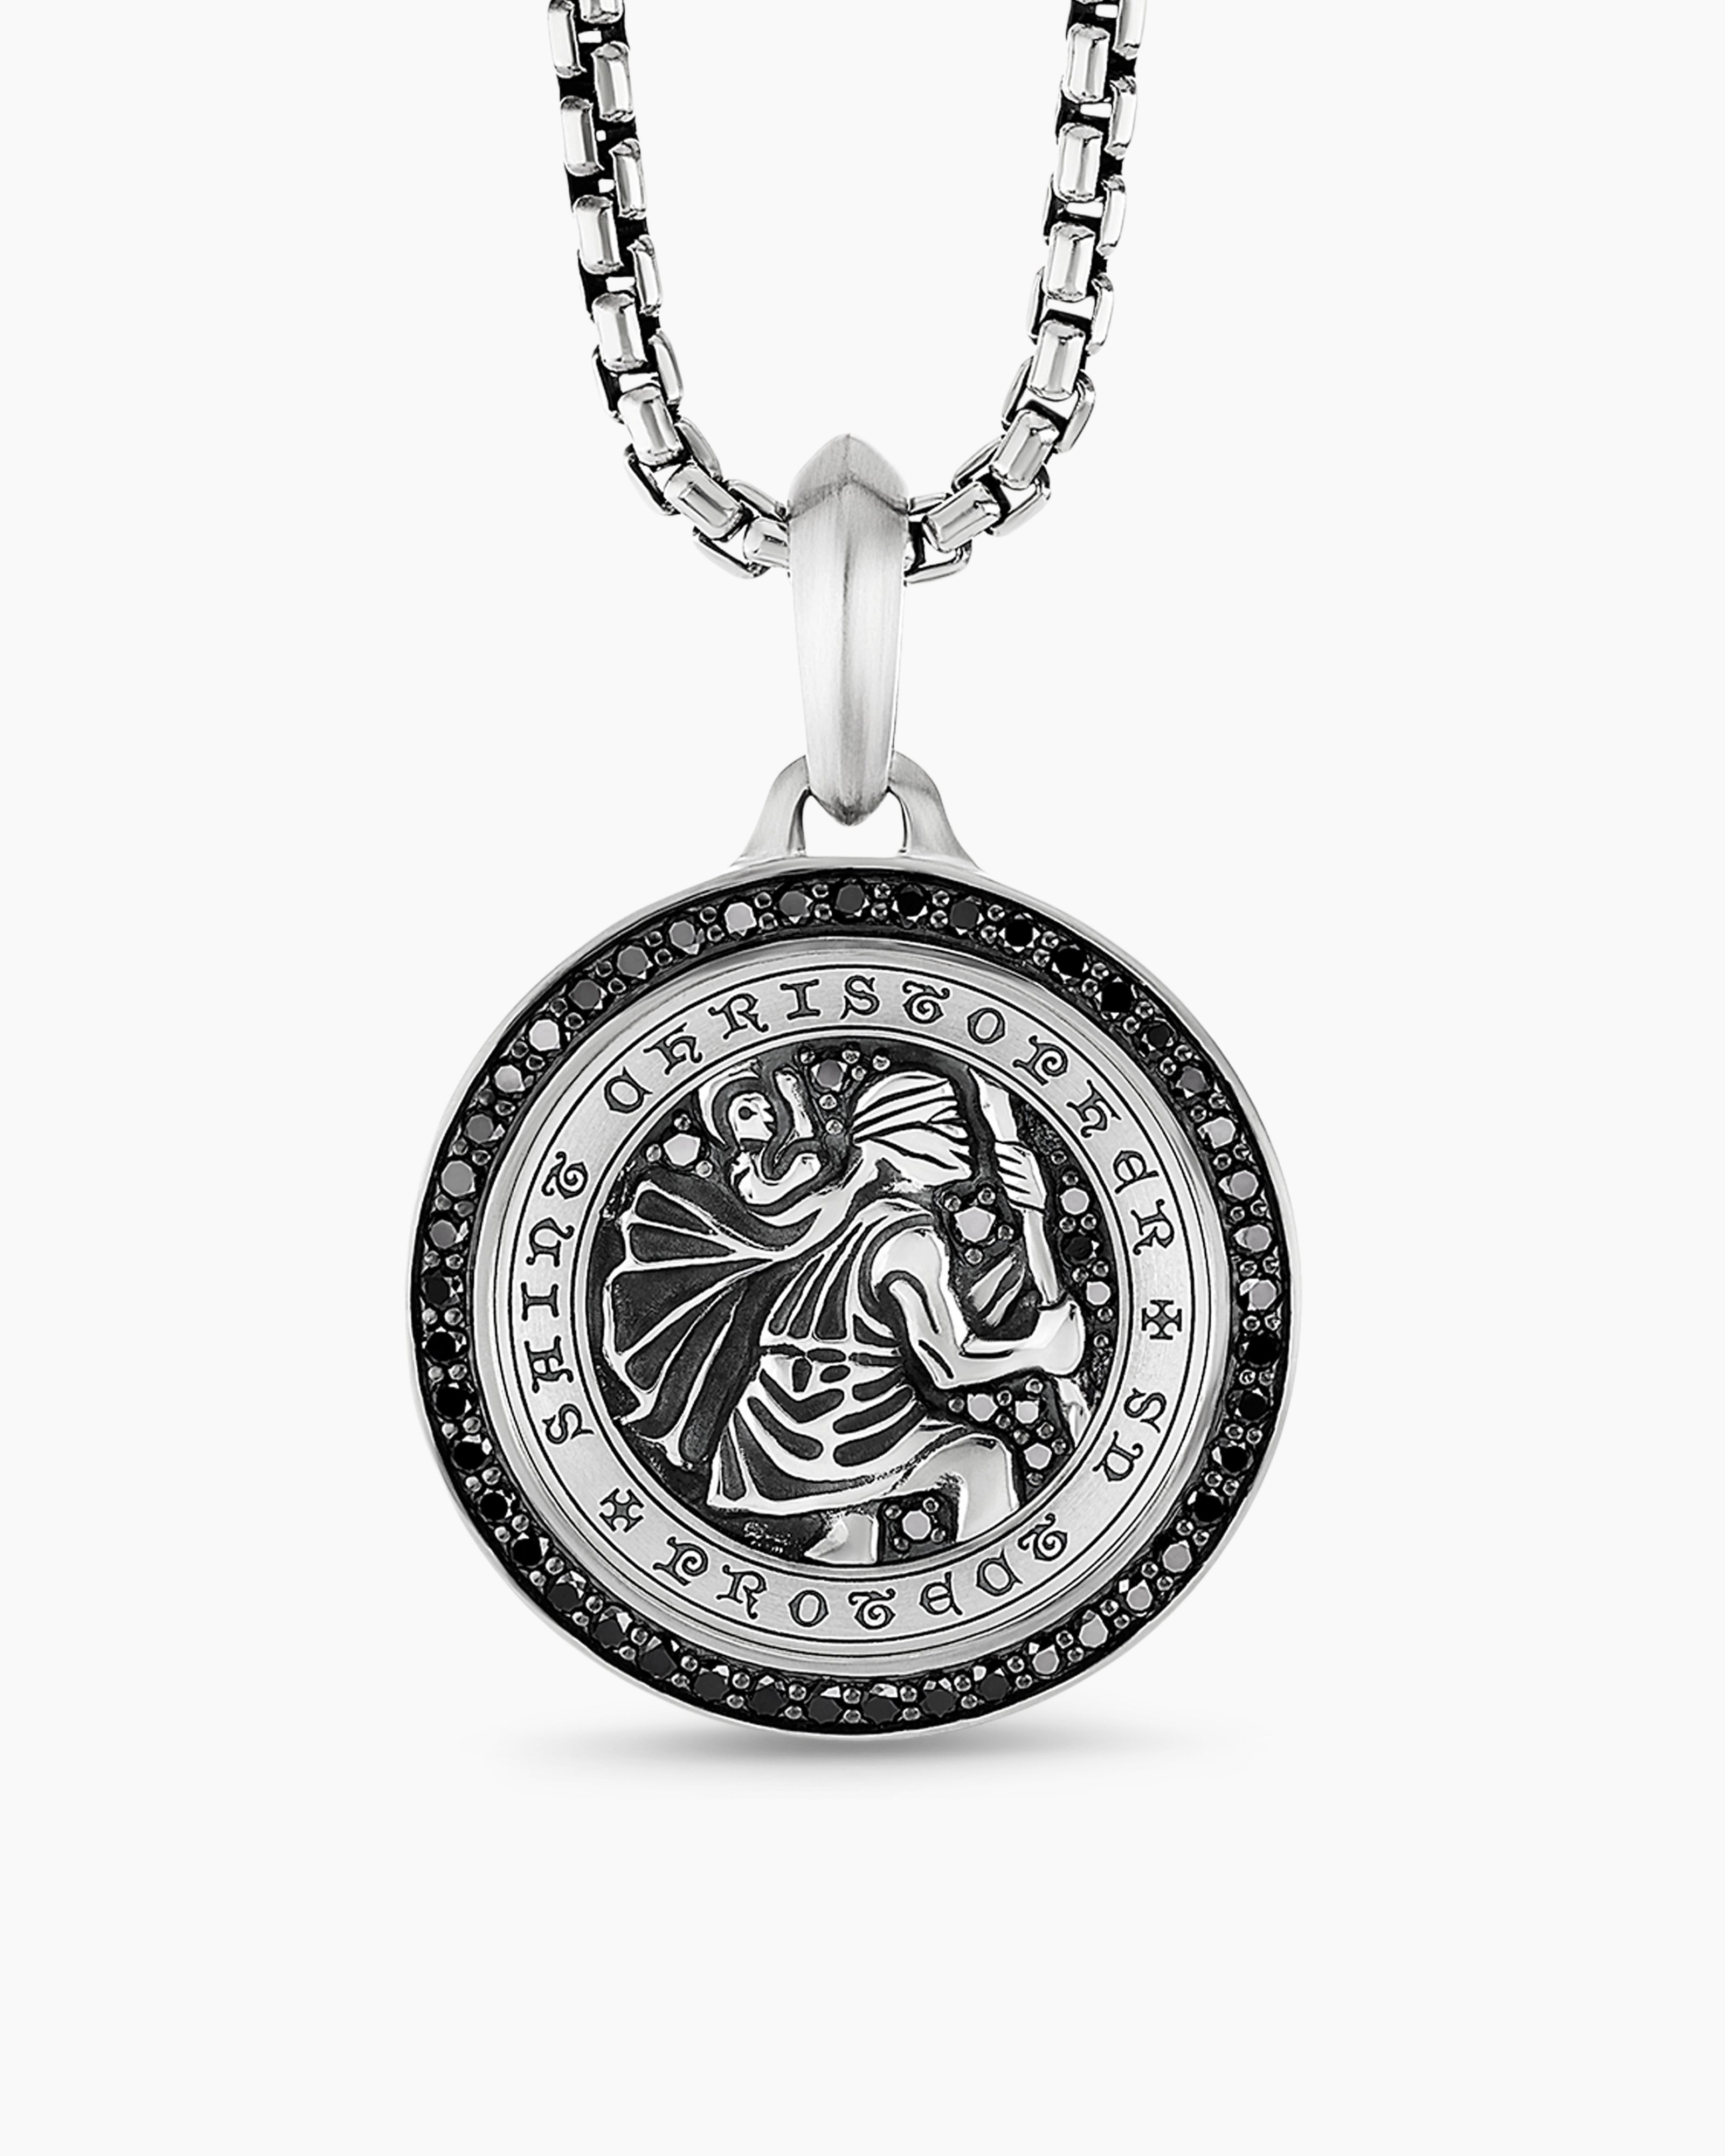 St. Christopher Amulet in Sterling Silver with Black Diamonds